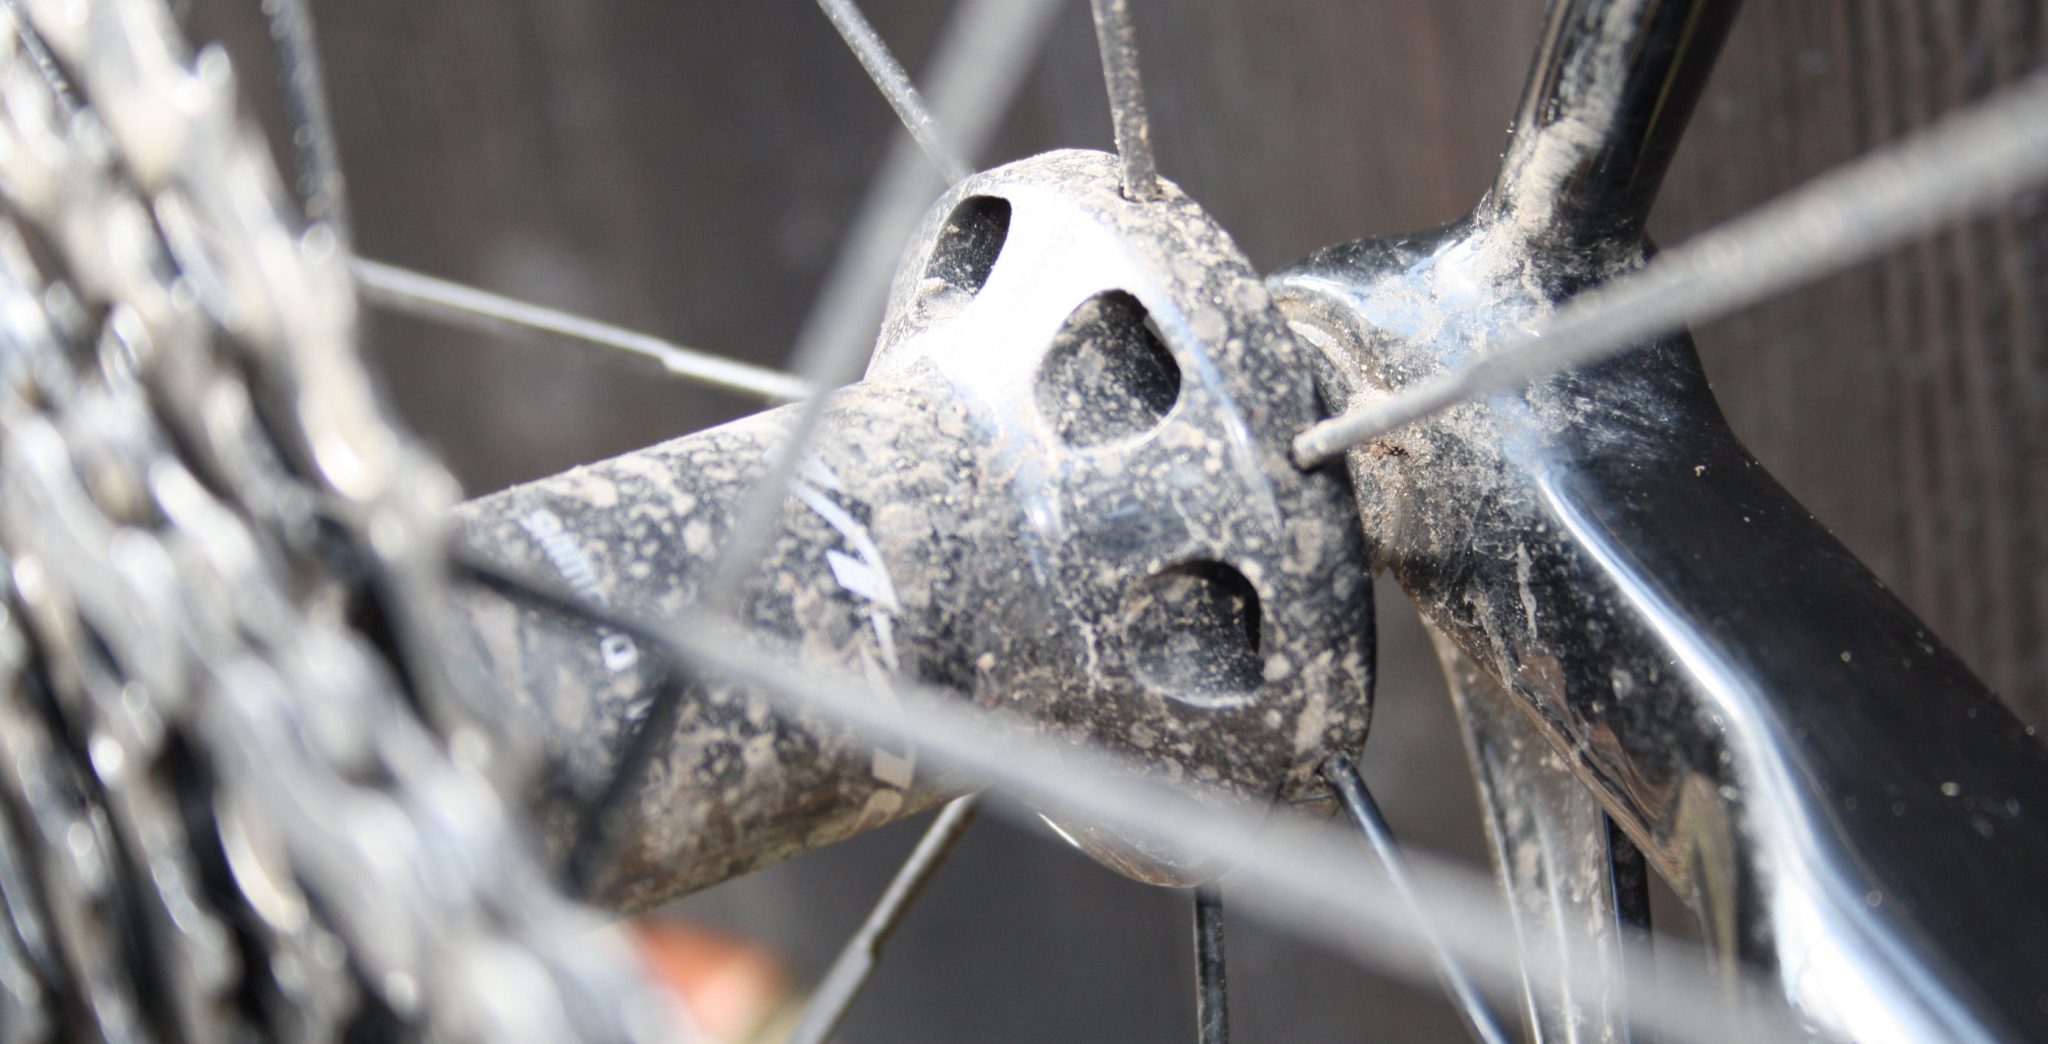 Shimano Dura Ace R9100 C60 Review - on my dirty bike